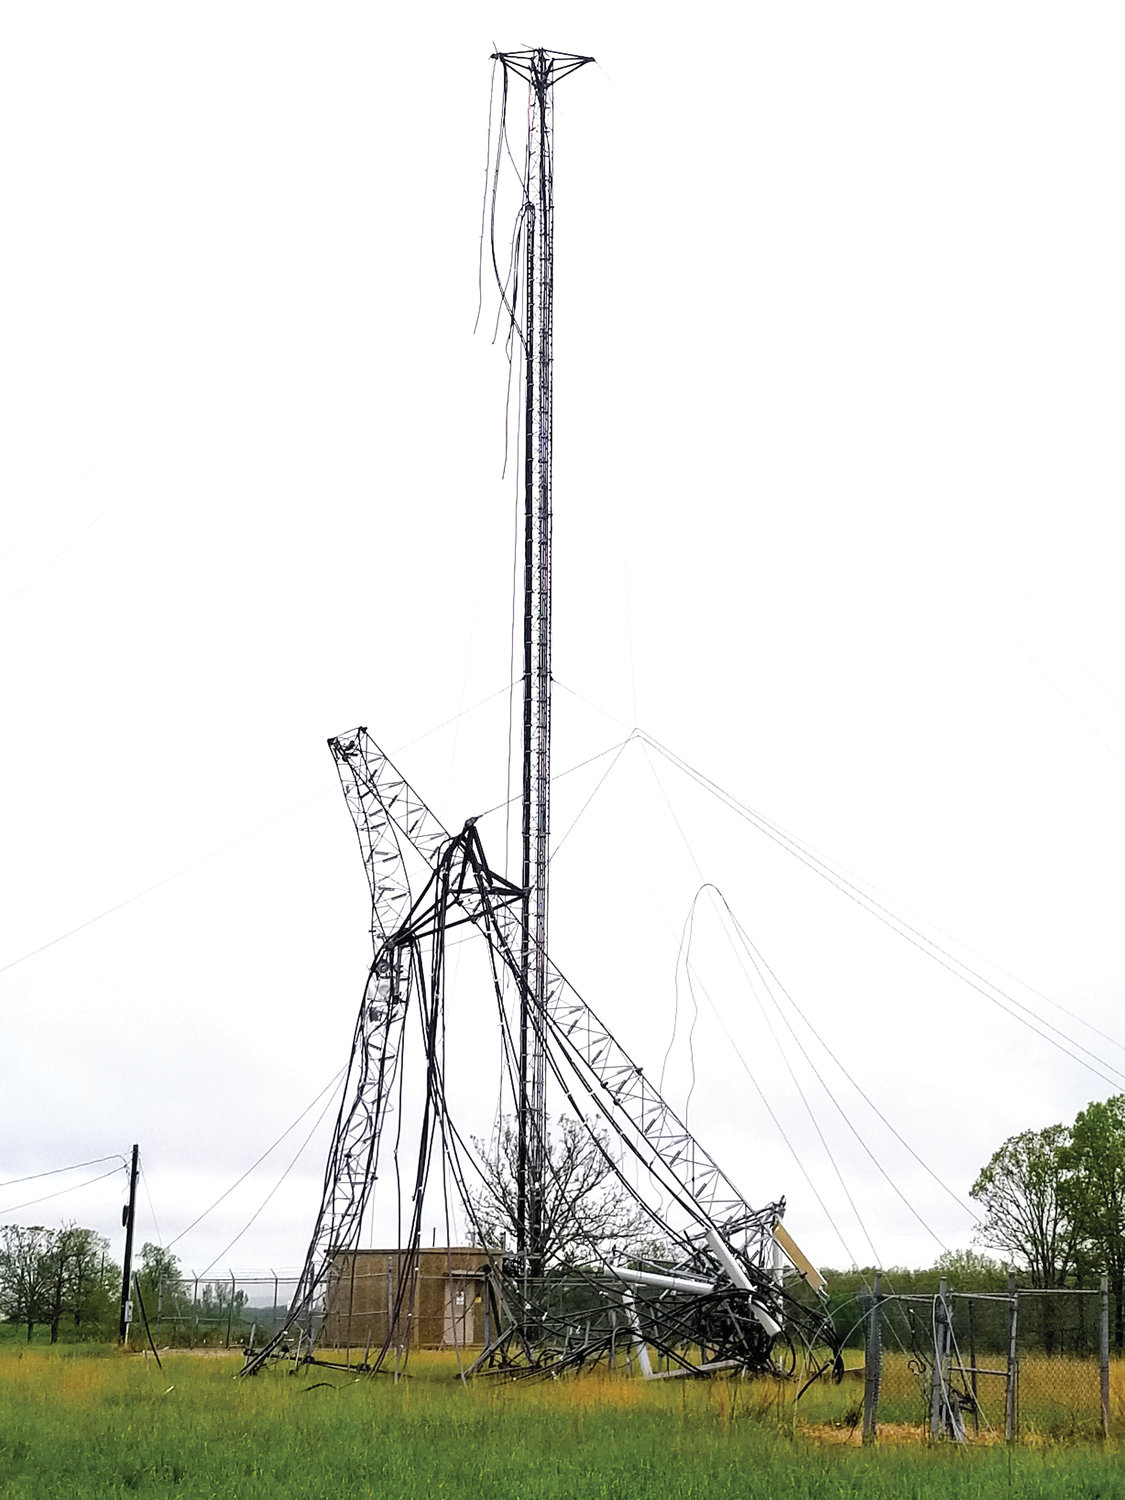 The several damaged cell phone tower for U.S. Cellular suffered significant damage due to last Monday’s storm. It has since been torn down. A new one will be constructed over the next couple of months.